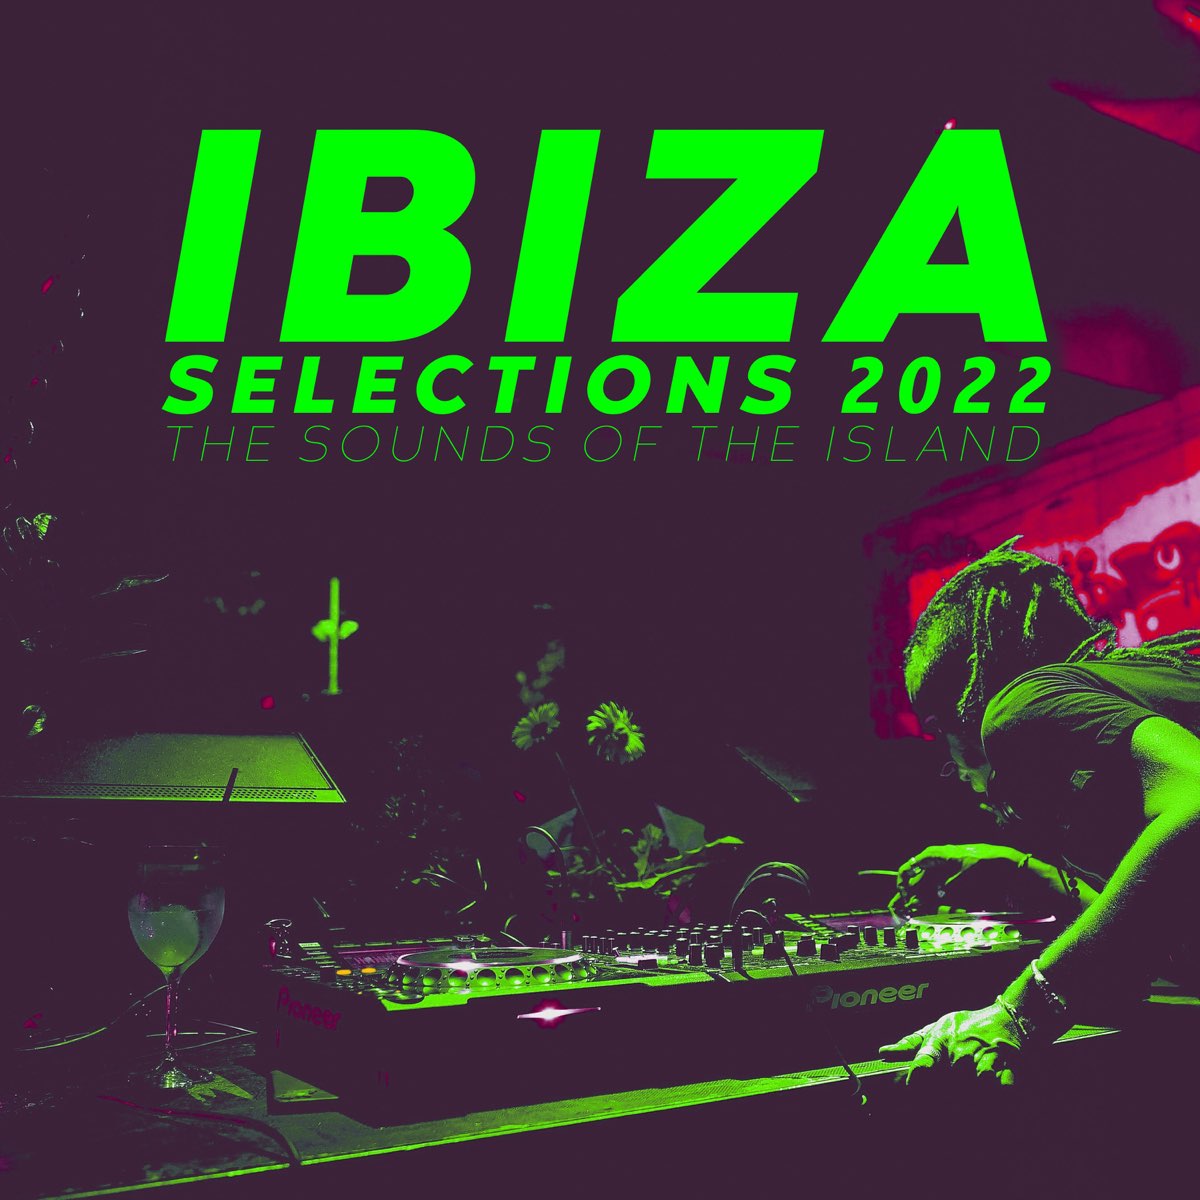 ‎Ibiza Selections 2022 - The Sounds of the Island by Various Artists on ...